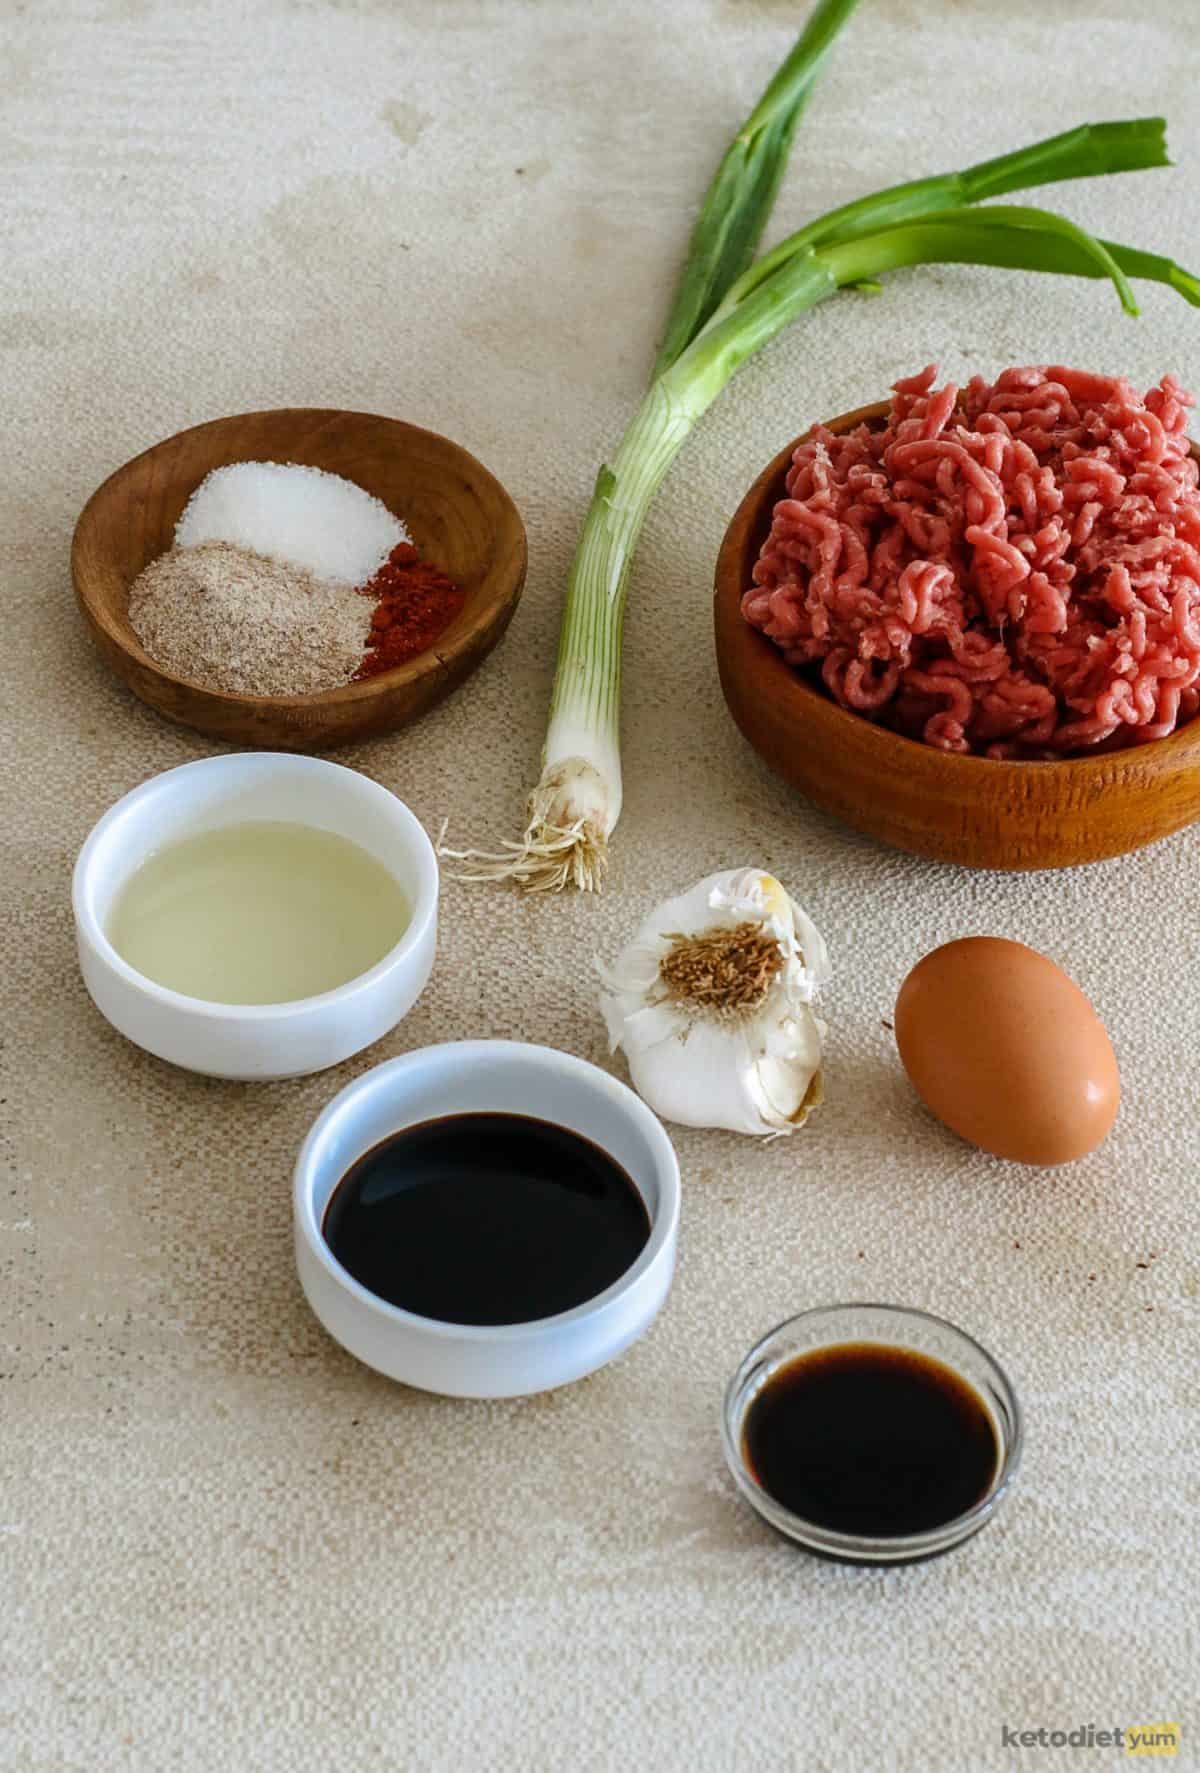 Ingredients arranged on a table used to make low carb keto Kung Pao meatballs